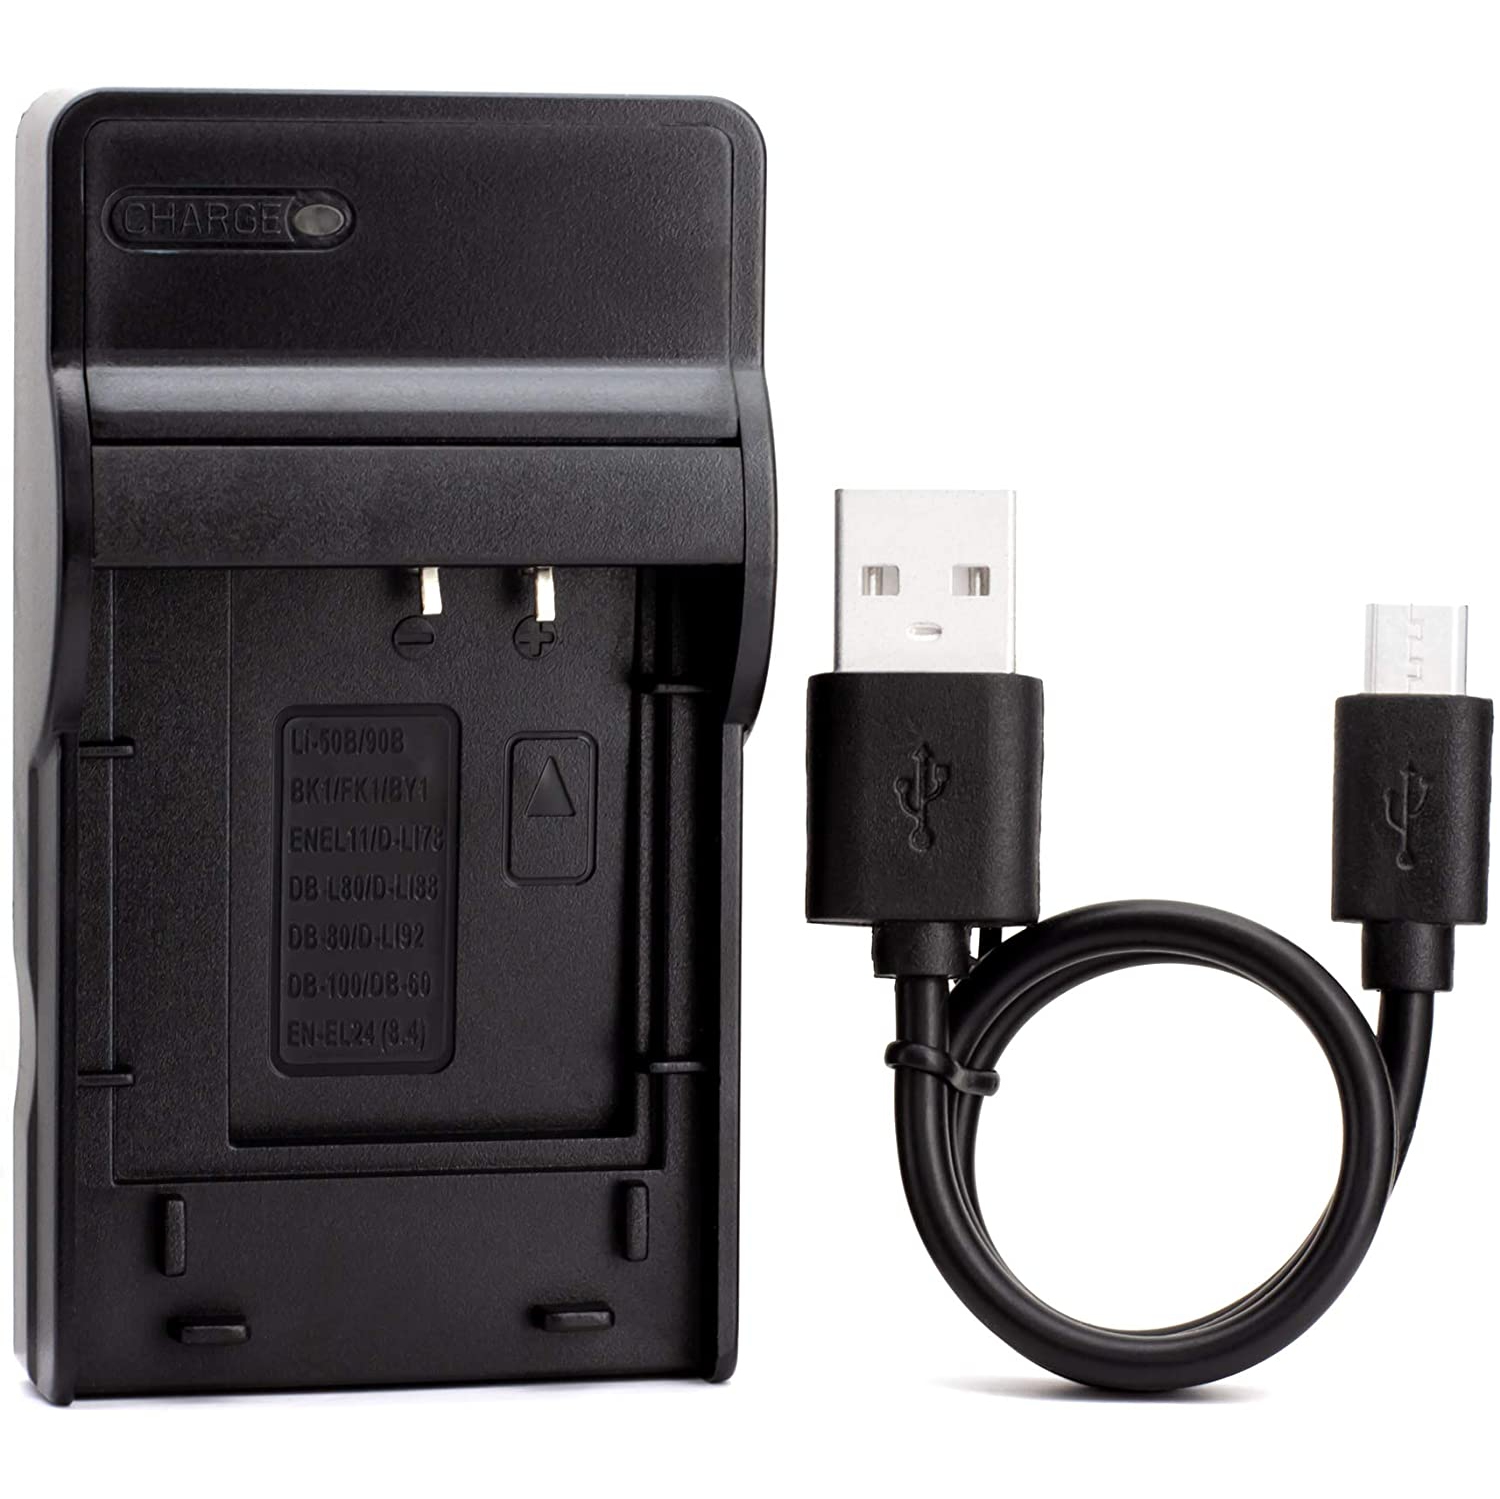 NP_BK1 USB Charger for Sony Cyber_shot DSC_S750, DSC_S780, DSC_S950, DSC_S980, DSC_W180, DSC_W190, DSC_W370, MHS_PM5, Webbie HD,